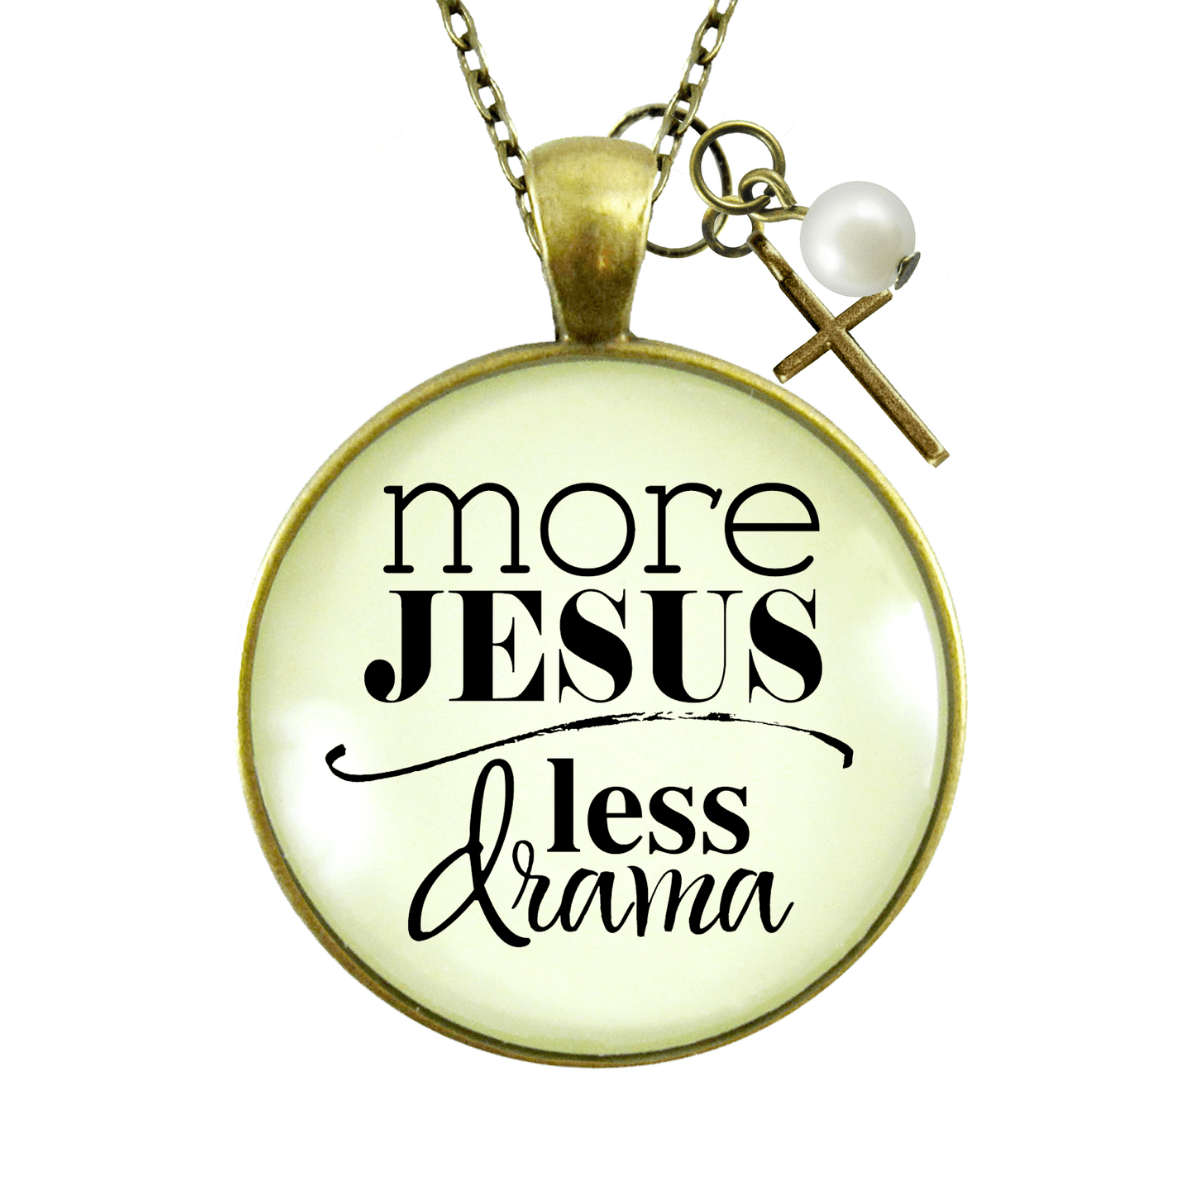 Gutsy Goodness More Jesus Less Drama Necklace Christian Faith Jewelry Cross Charm - Gutsy Goodness;More Jesus Less Drama Necklace Christian Faith Jewelry Cross Charm - Gutsy Goodness Handmade Jewelry Gifts